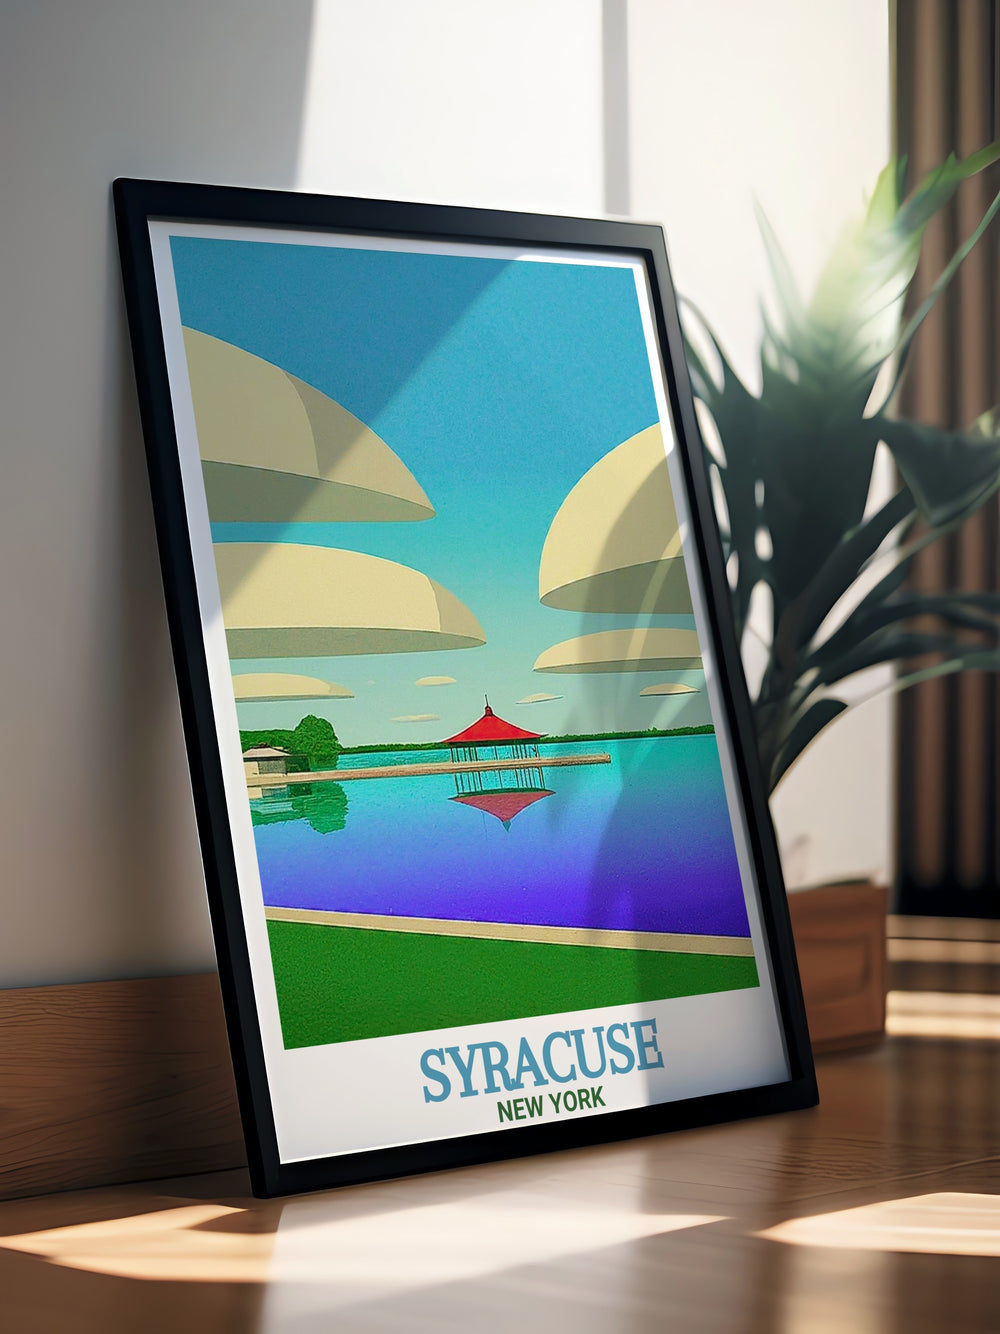 Stunning Onondaga Lake Park artwork featuring lush greenery and serene landscapes a beautiful addition to any room in your home bringing the peaceful ambiance of Syracuse into your living space perfect for anyone who loves Syracuse and its natural beauty